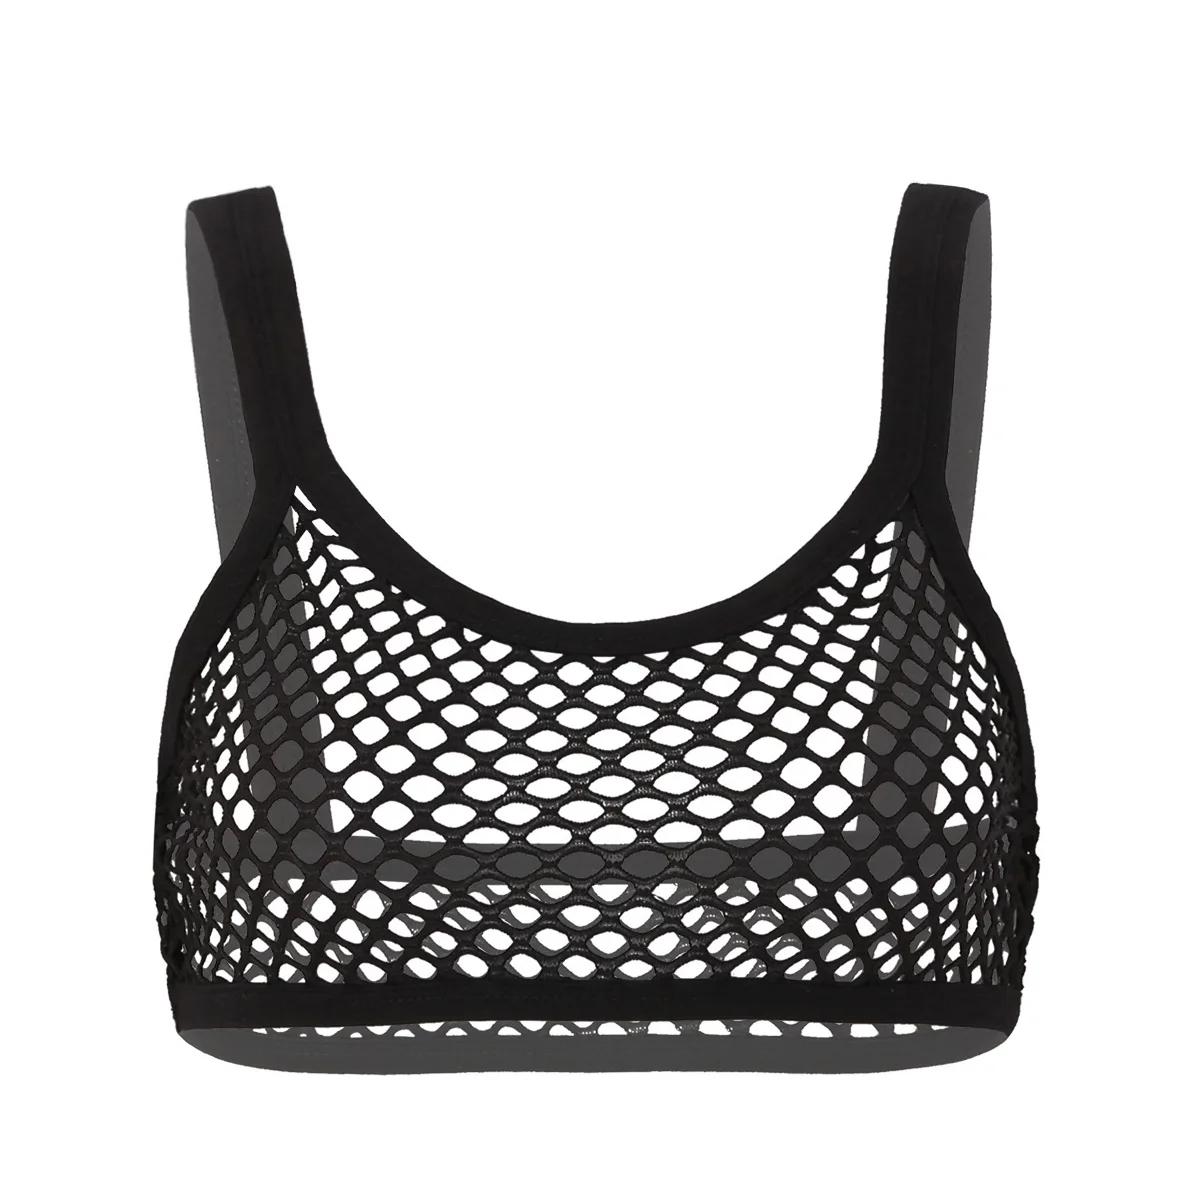 

Women Sexy Bras Lingerie Porno Crop Tops See-through Fishnet Sheer Mesh Bra Top Hollow Out Camisole Beach Rave Party Clubwear